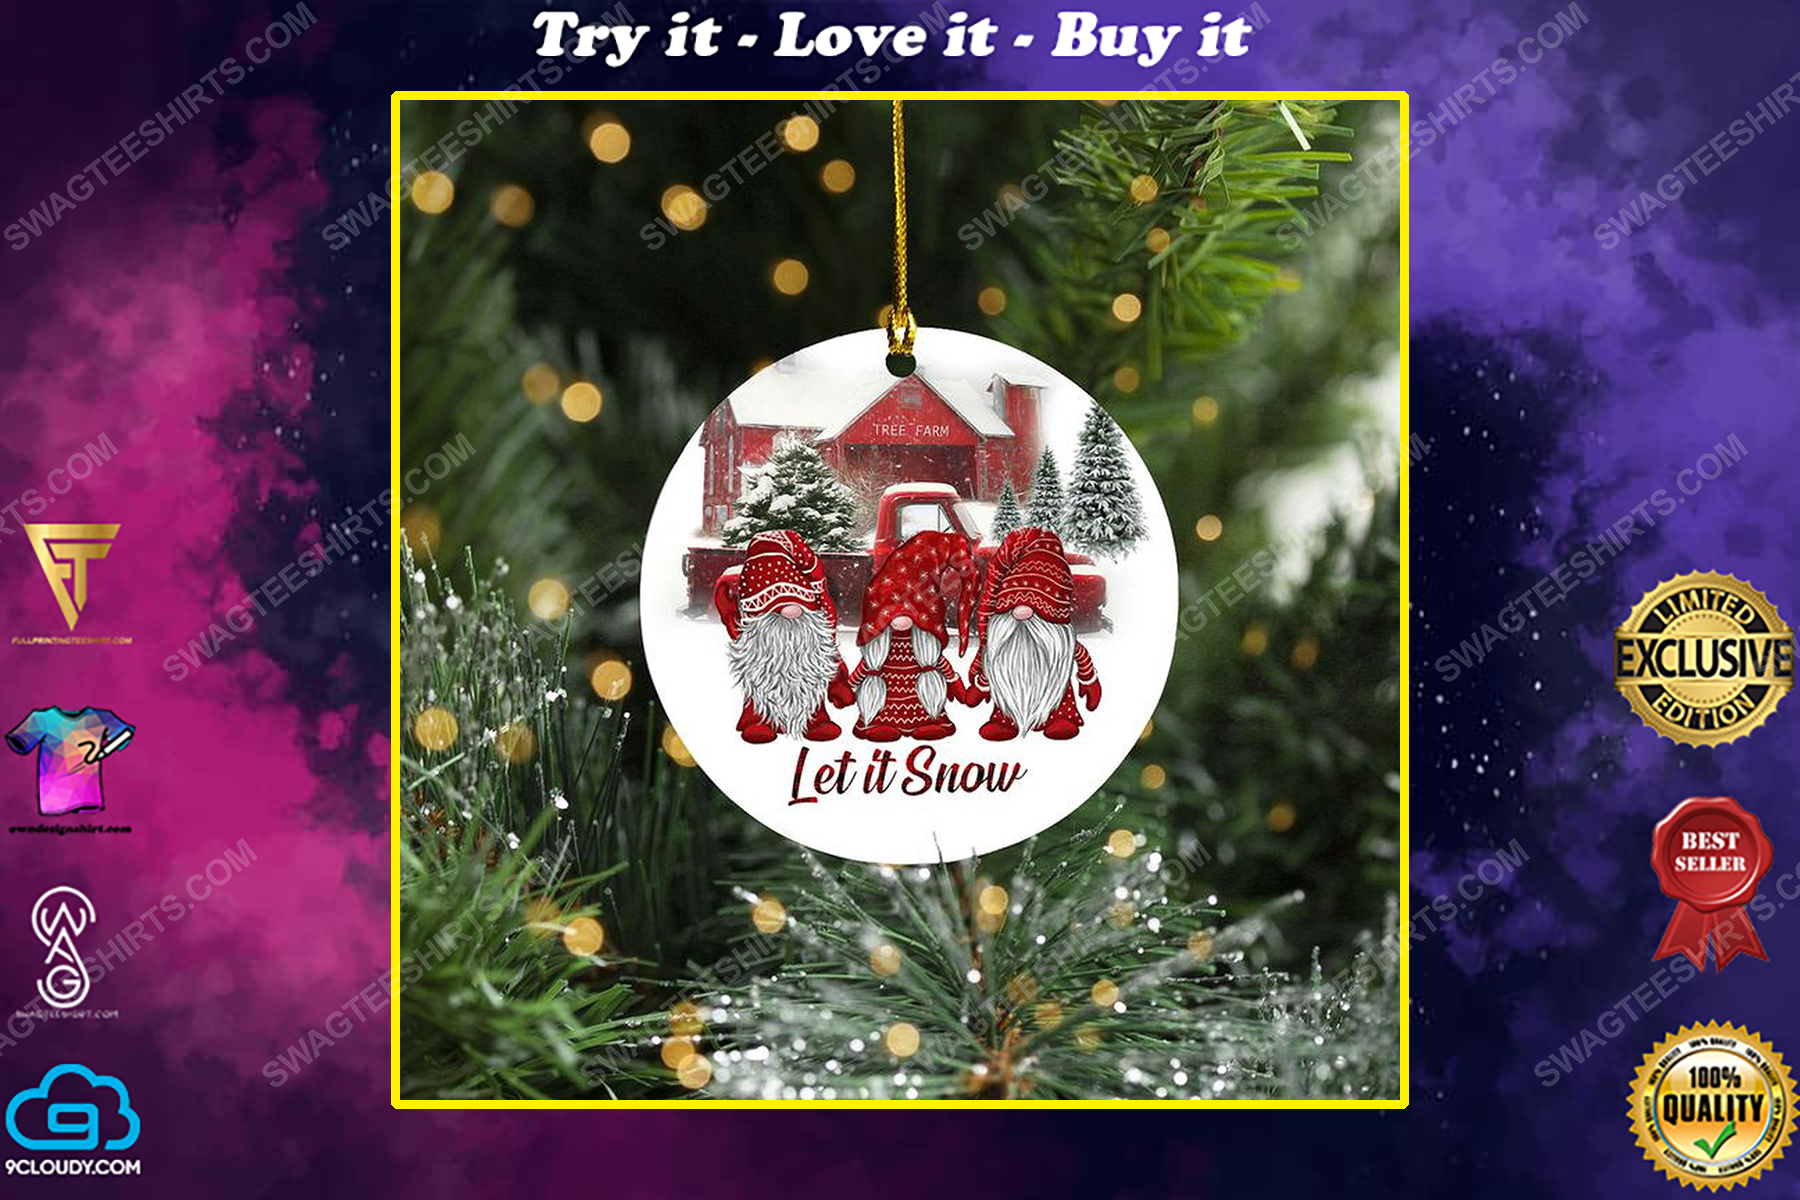 Let it snow gnome christmas gift ornament